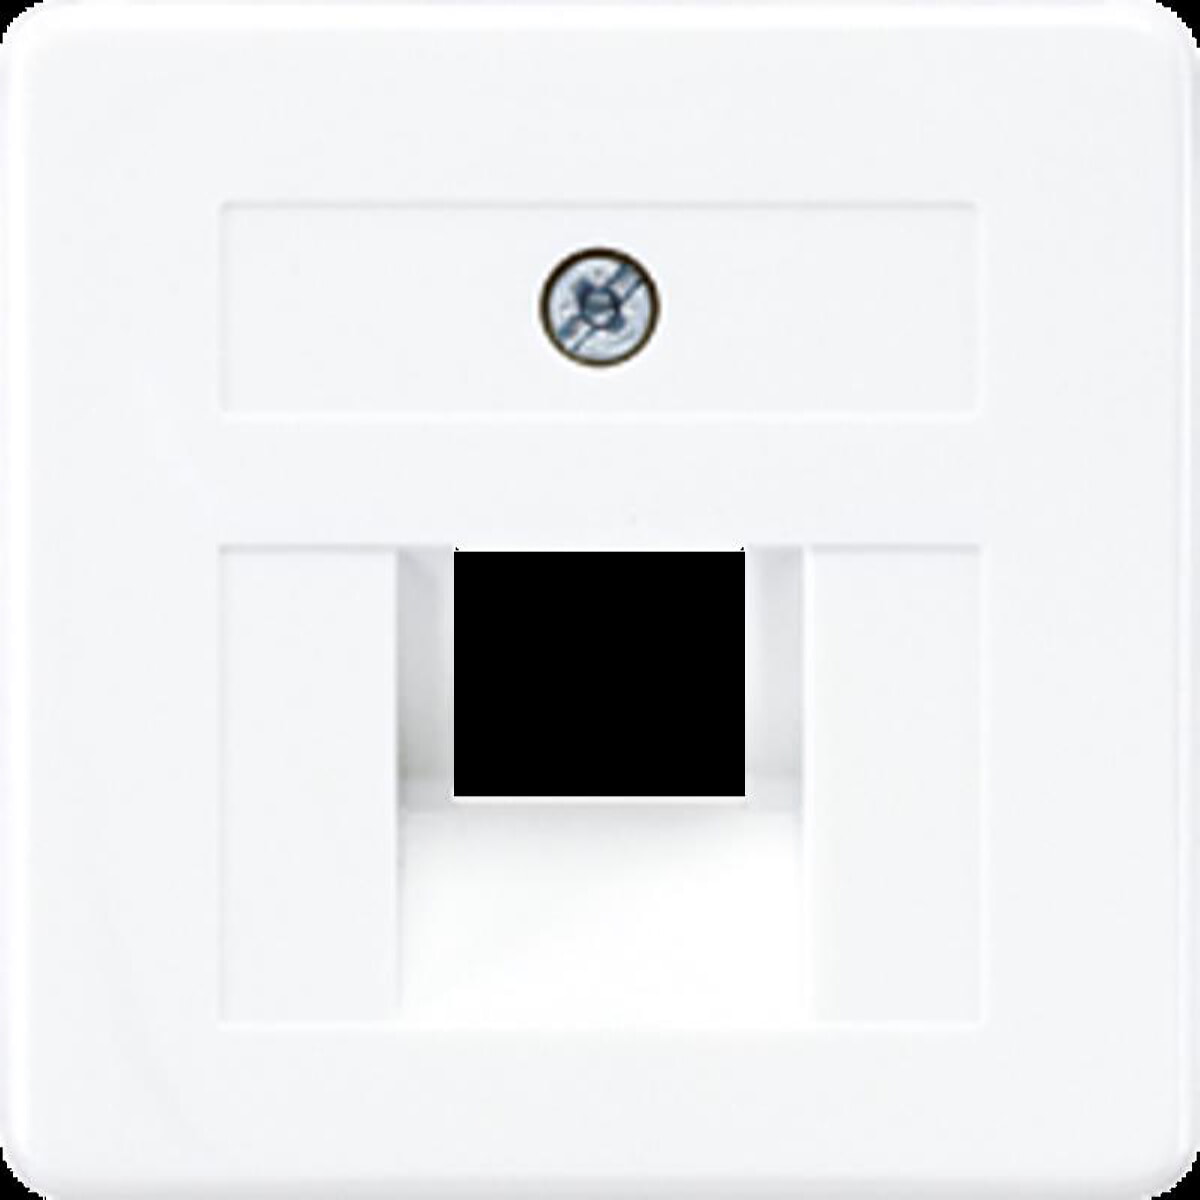 Jung cover for IAE/UAE junction boxes 1 x 8-pin, thermoplastic, 50 x 50 mm, alpine white 169-1UAEWW